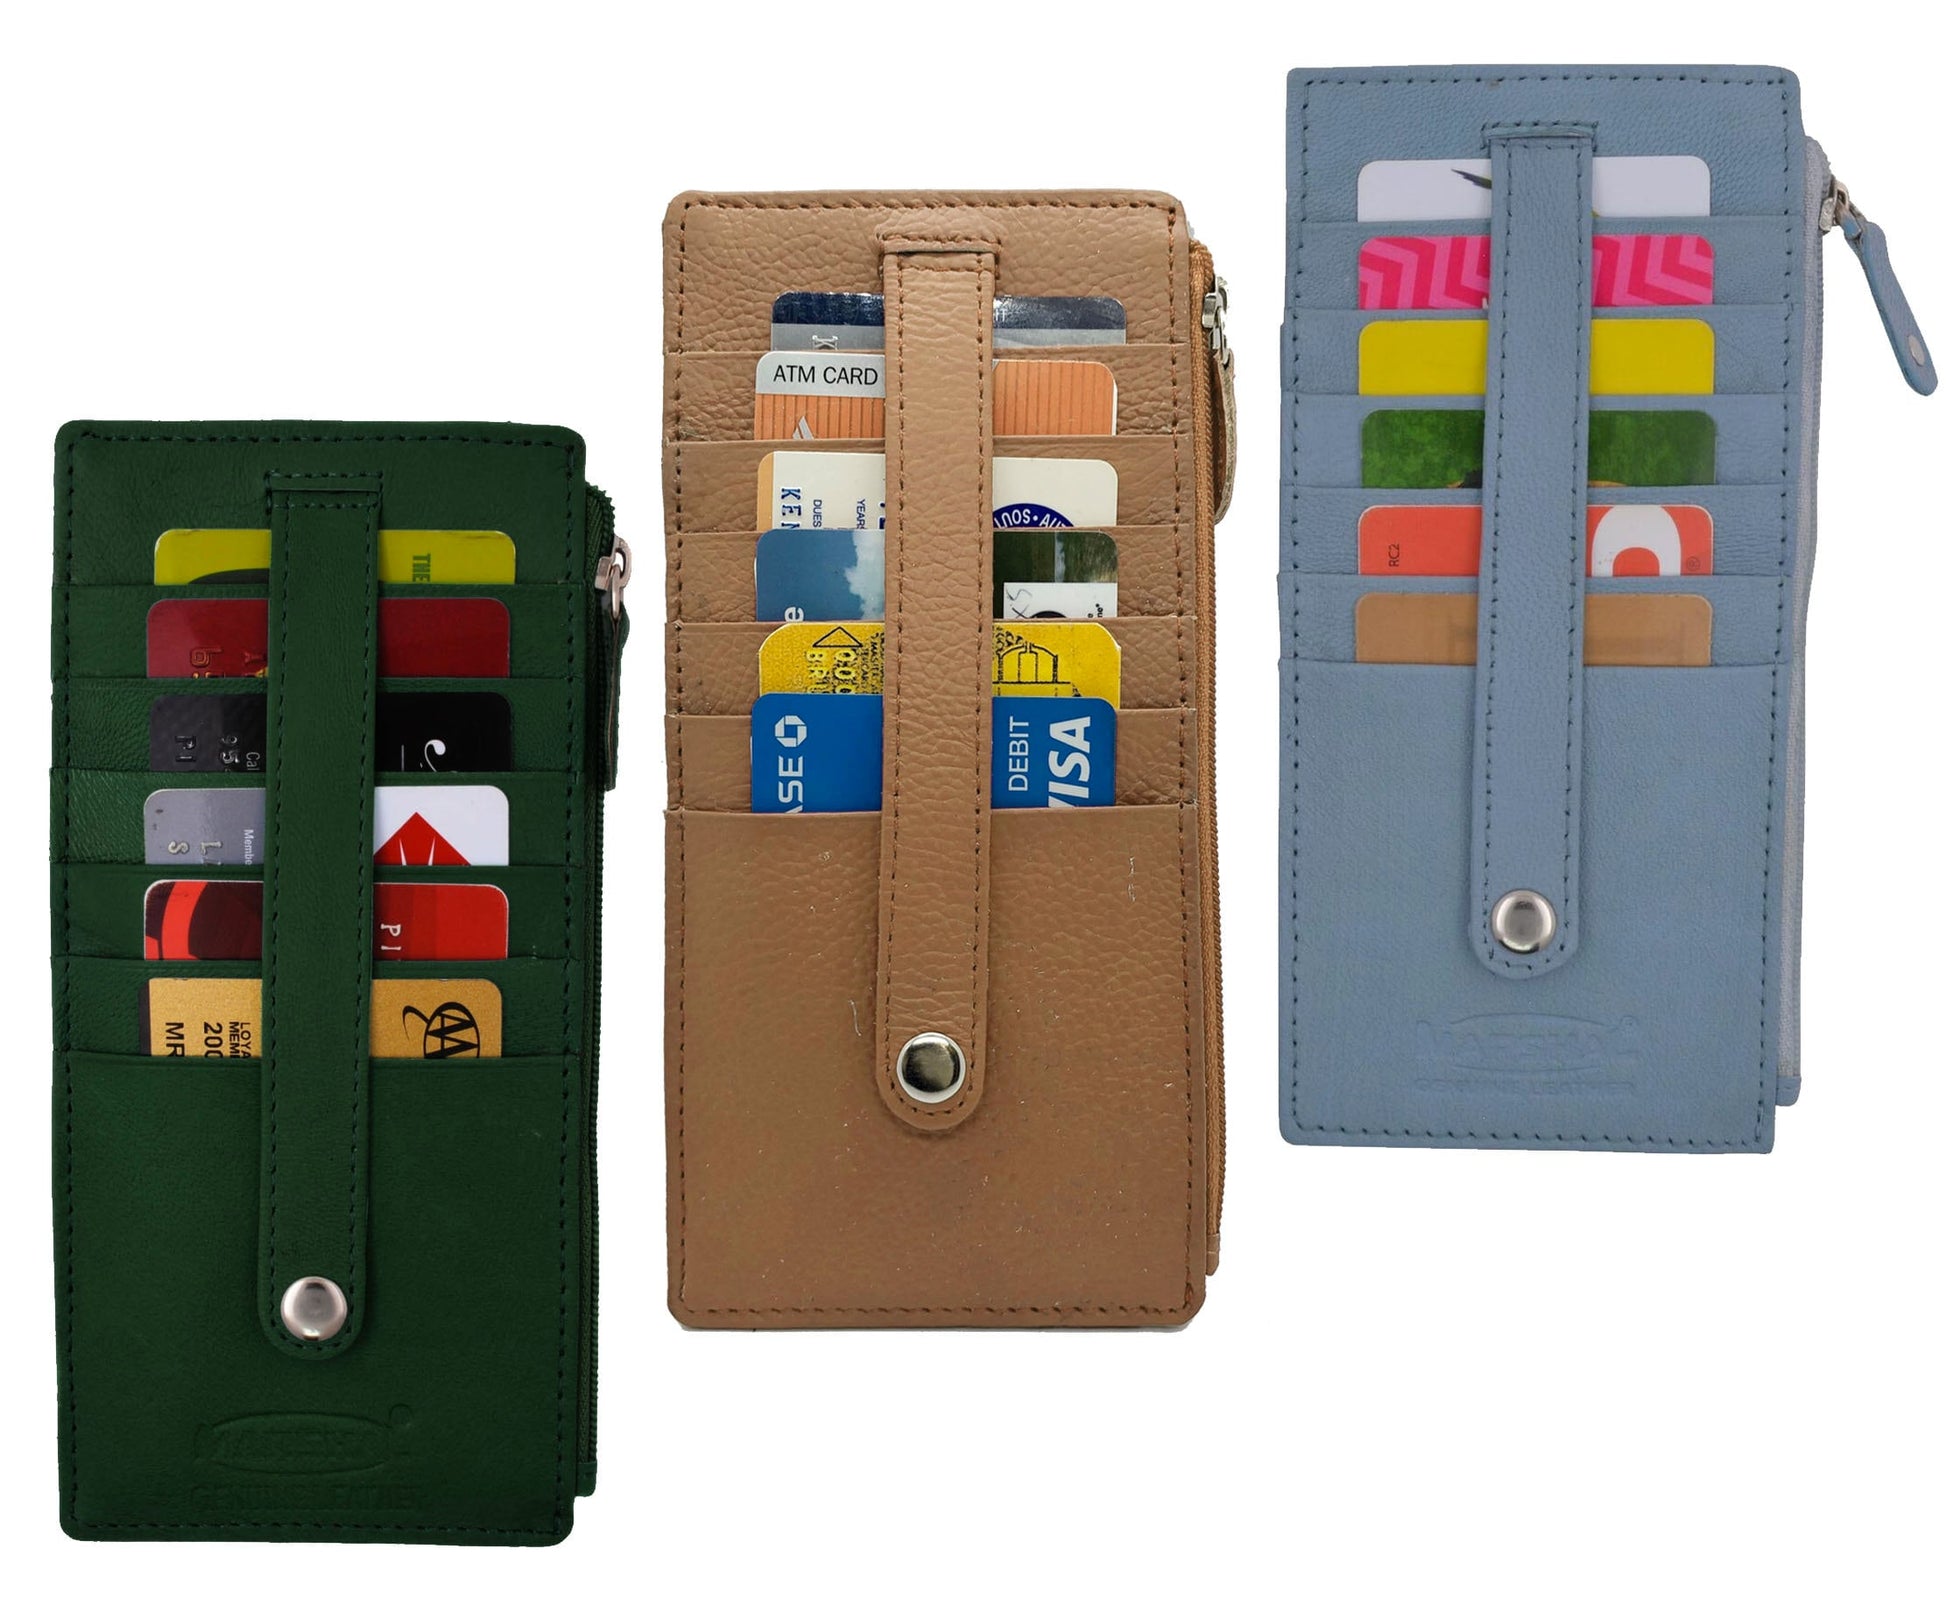 Robinson Card Case: Women's Wallets & Card Cases, Card Cases